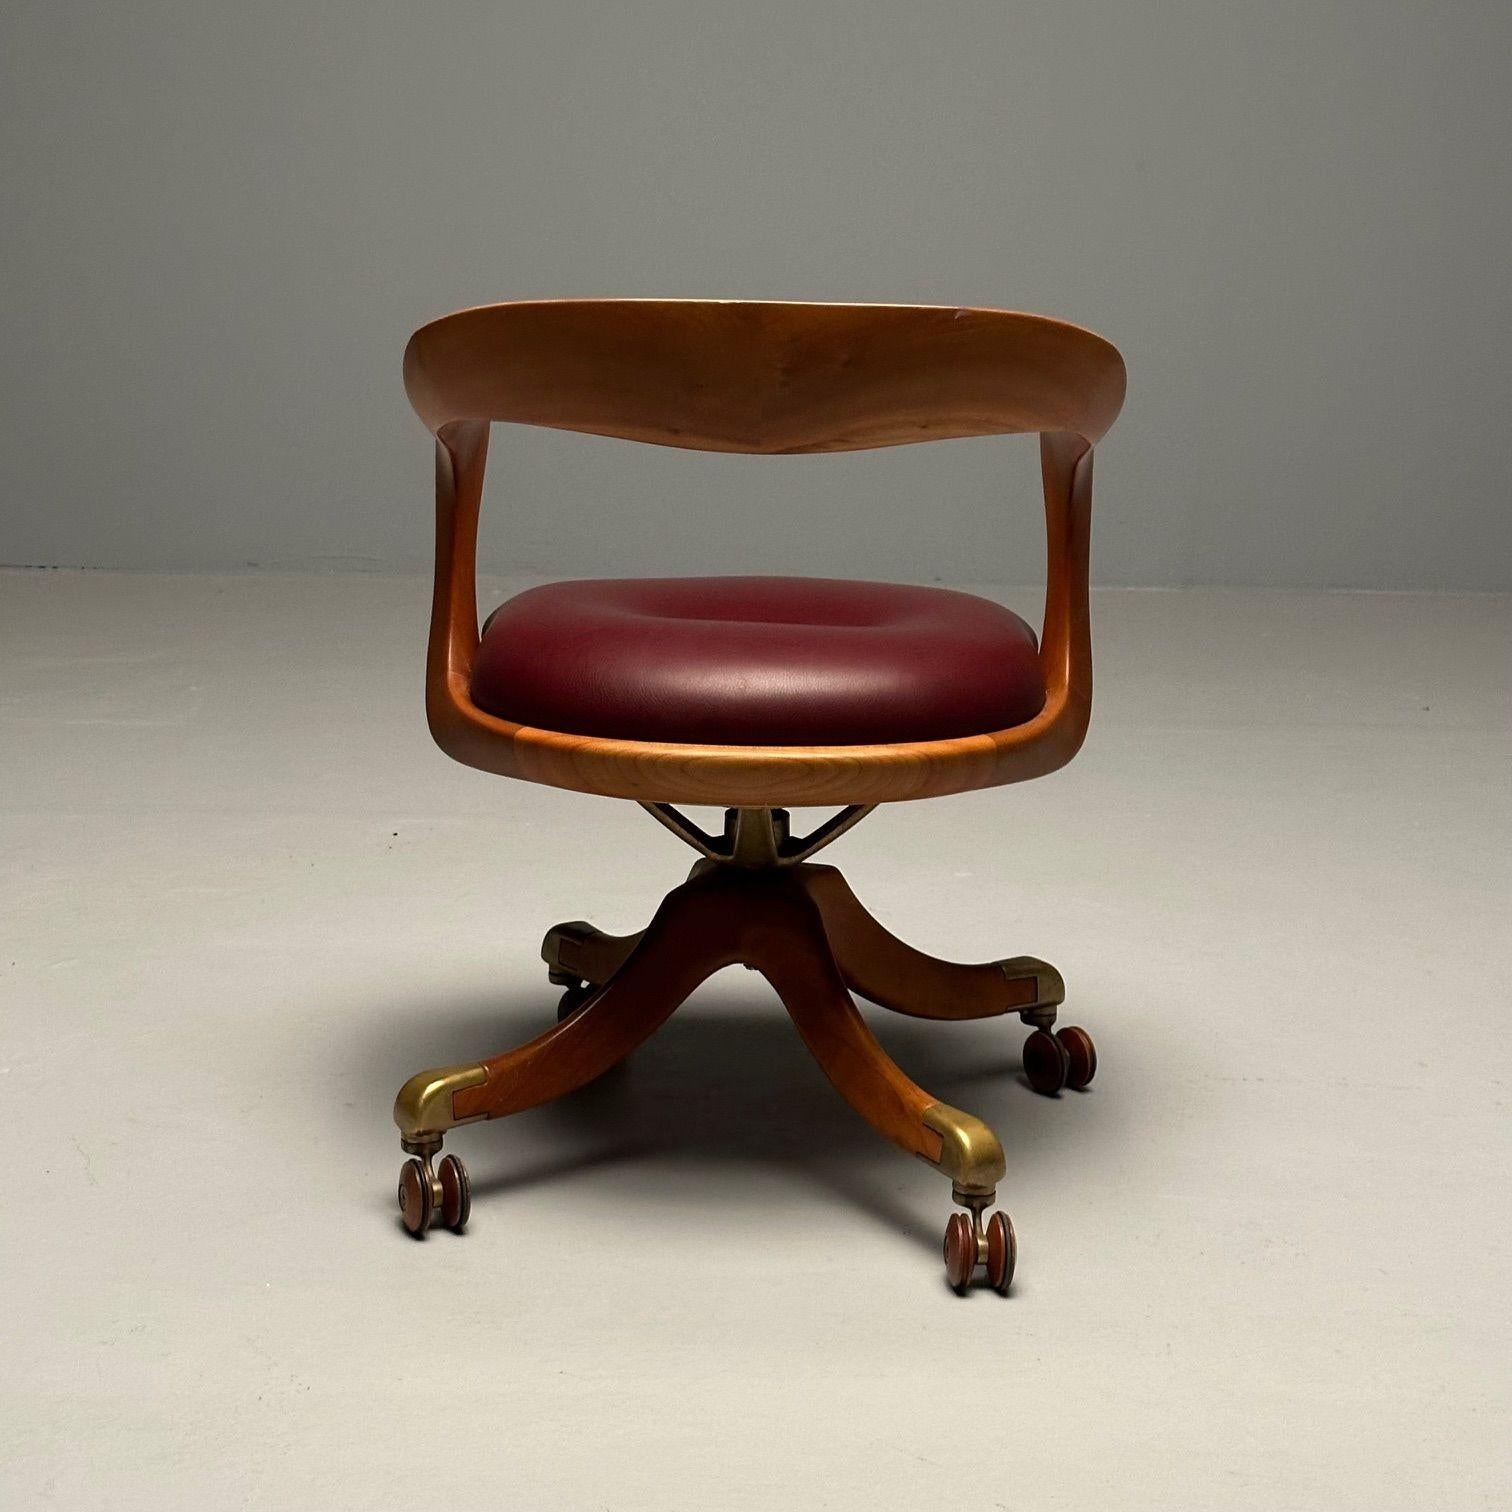 Ceccotti Collezioni, Modern, Office Chair, Light Walnut, Red Leather, 2000s For Sale 13